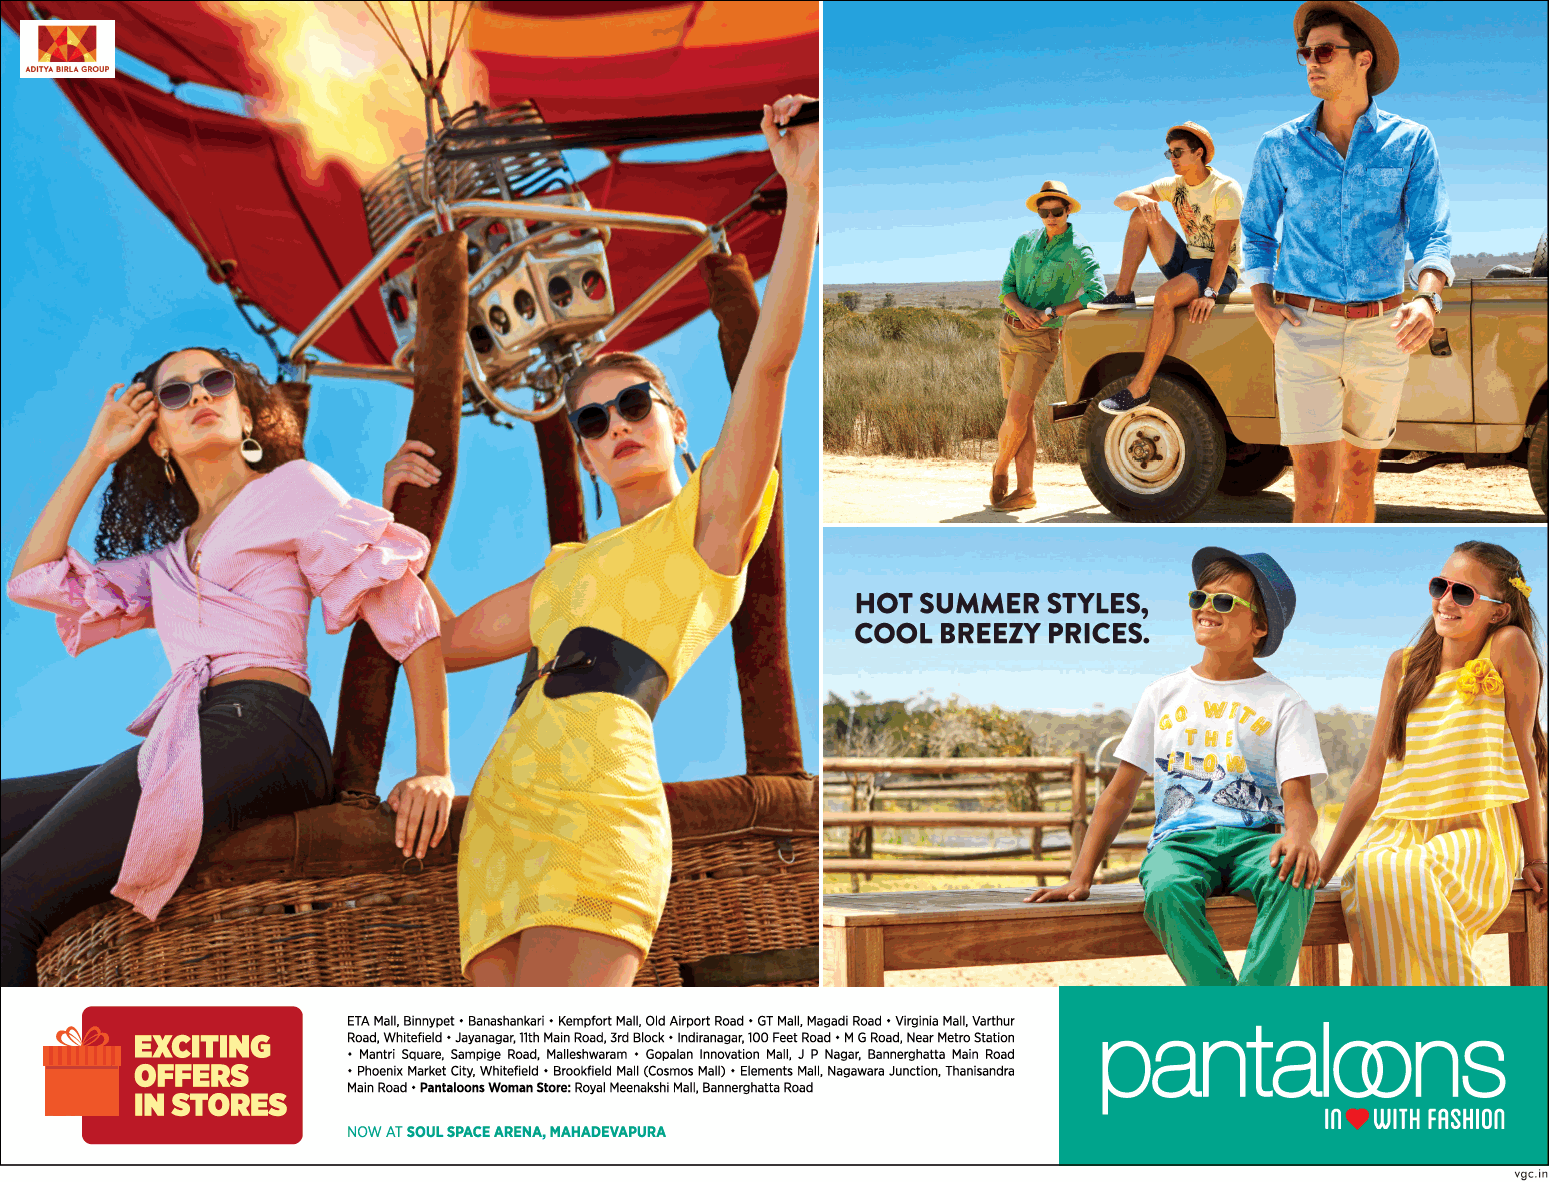 Pantaloons Clothing Exciting Offers In Stores Ad - Advert Gallery